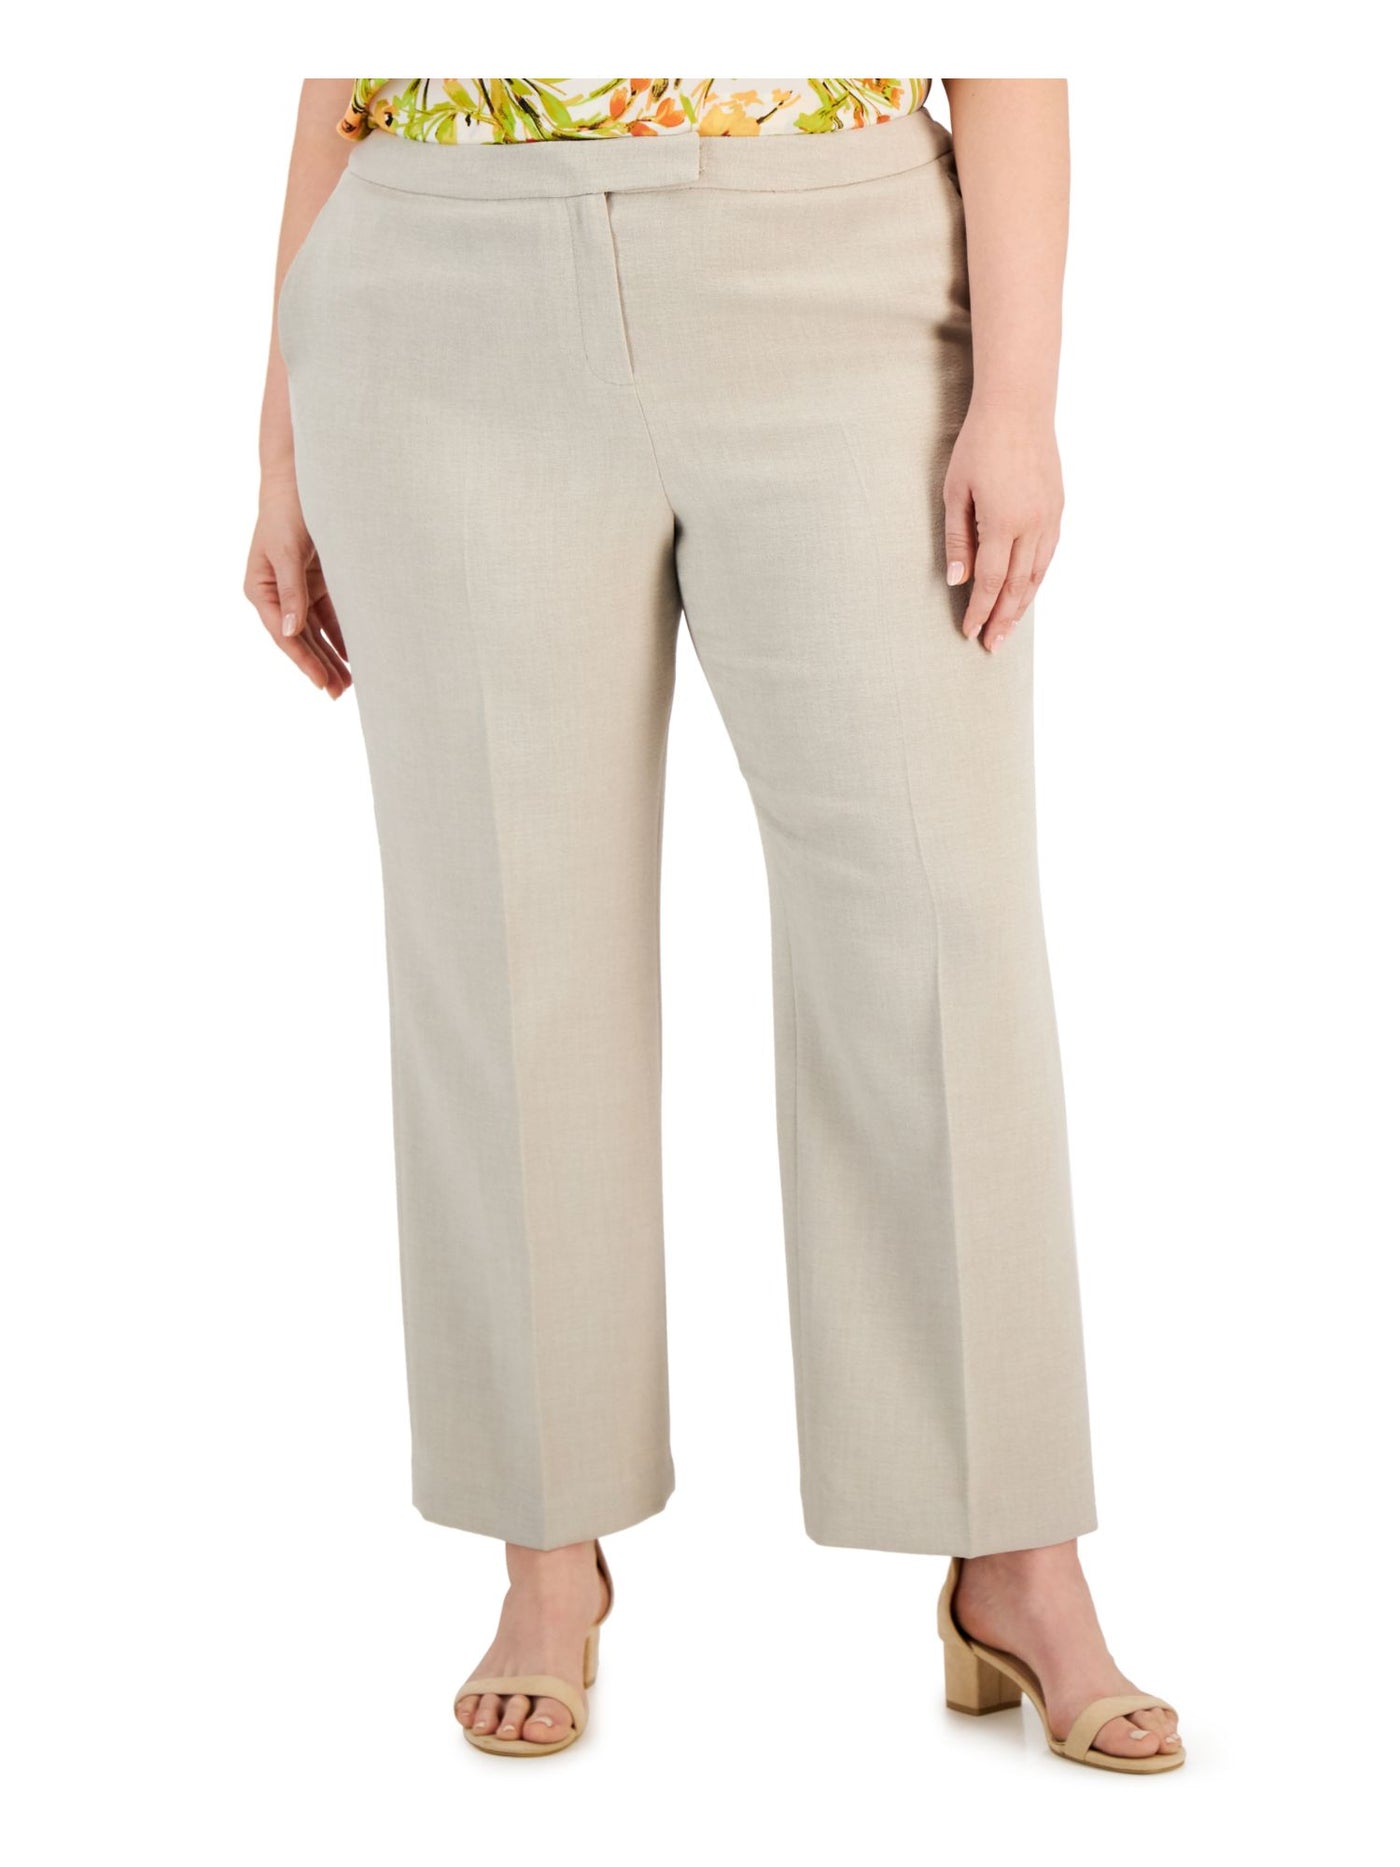 KASPER Womens Beige Zippered Pocketed Extended Hook And Bar Closure Wear To Work Straight leg Pants Plus 18W